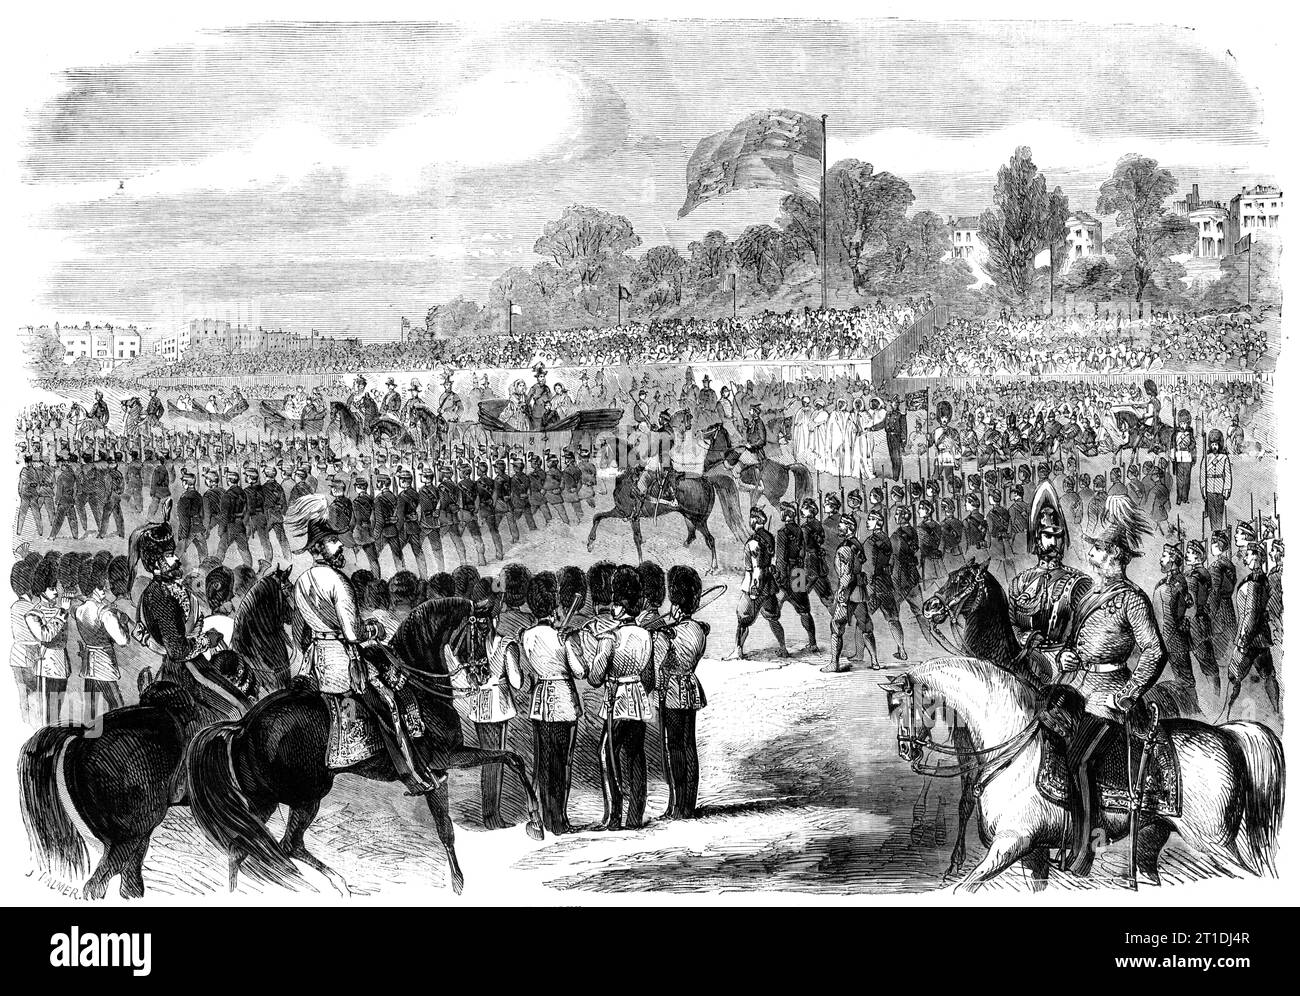 The Volunteer Review in Hyde Park, [London], 1860. 'The volunteers were formed in a line of battalions, in contiguous columns at quarter distance, varying from 400 to 950 strong; four battalions forming a brigade, with the exception of the Artillery, which consisted of two battalions only. The whole mass or line was formed into two grand divisions, the first being the largest, embracing, in addition to four battalions (the strength of the second division), the Artillery Brigade, and the single battalion on the extreme right, composed of Mounted Rifles, the Hon. Artillery Company, Engineers, an Stock Photo